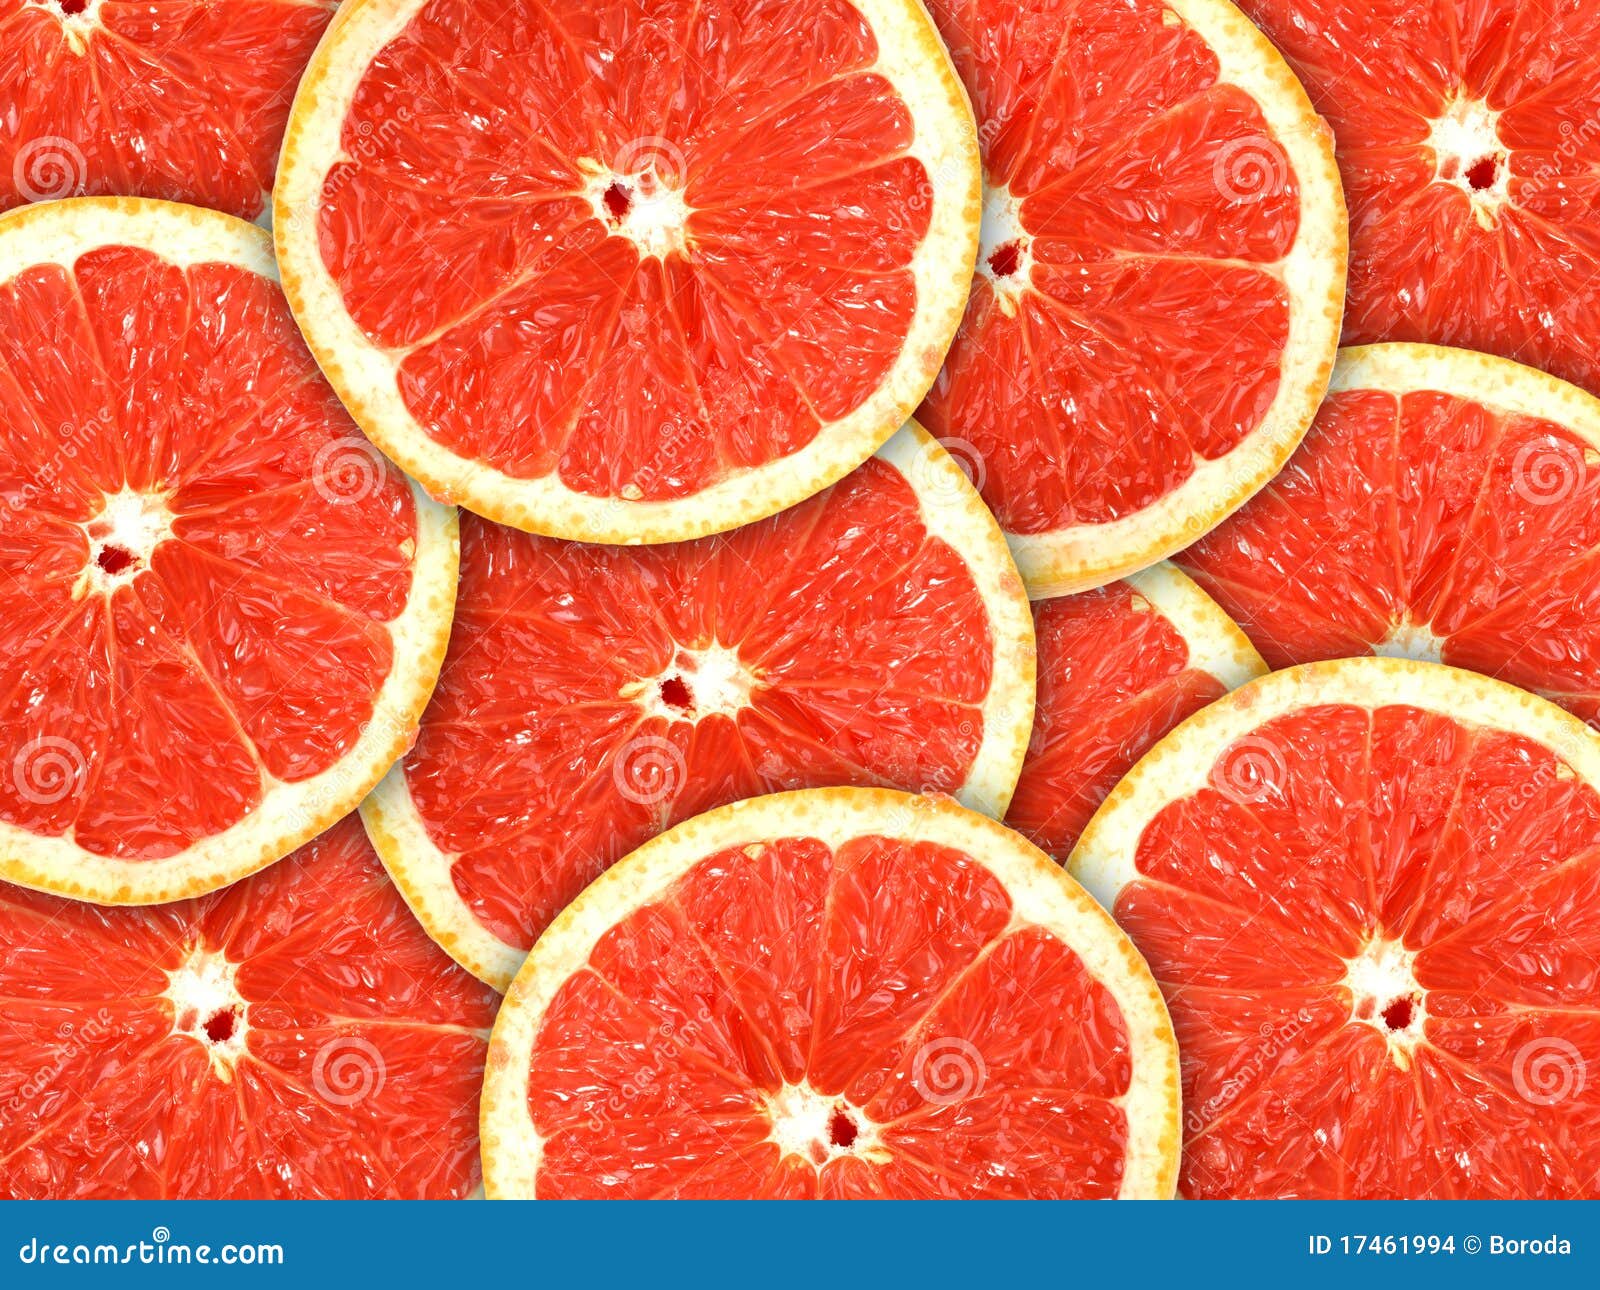 background with citrus-fruit of grapefruit slices